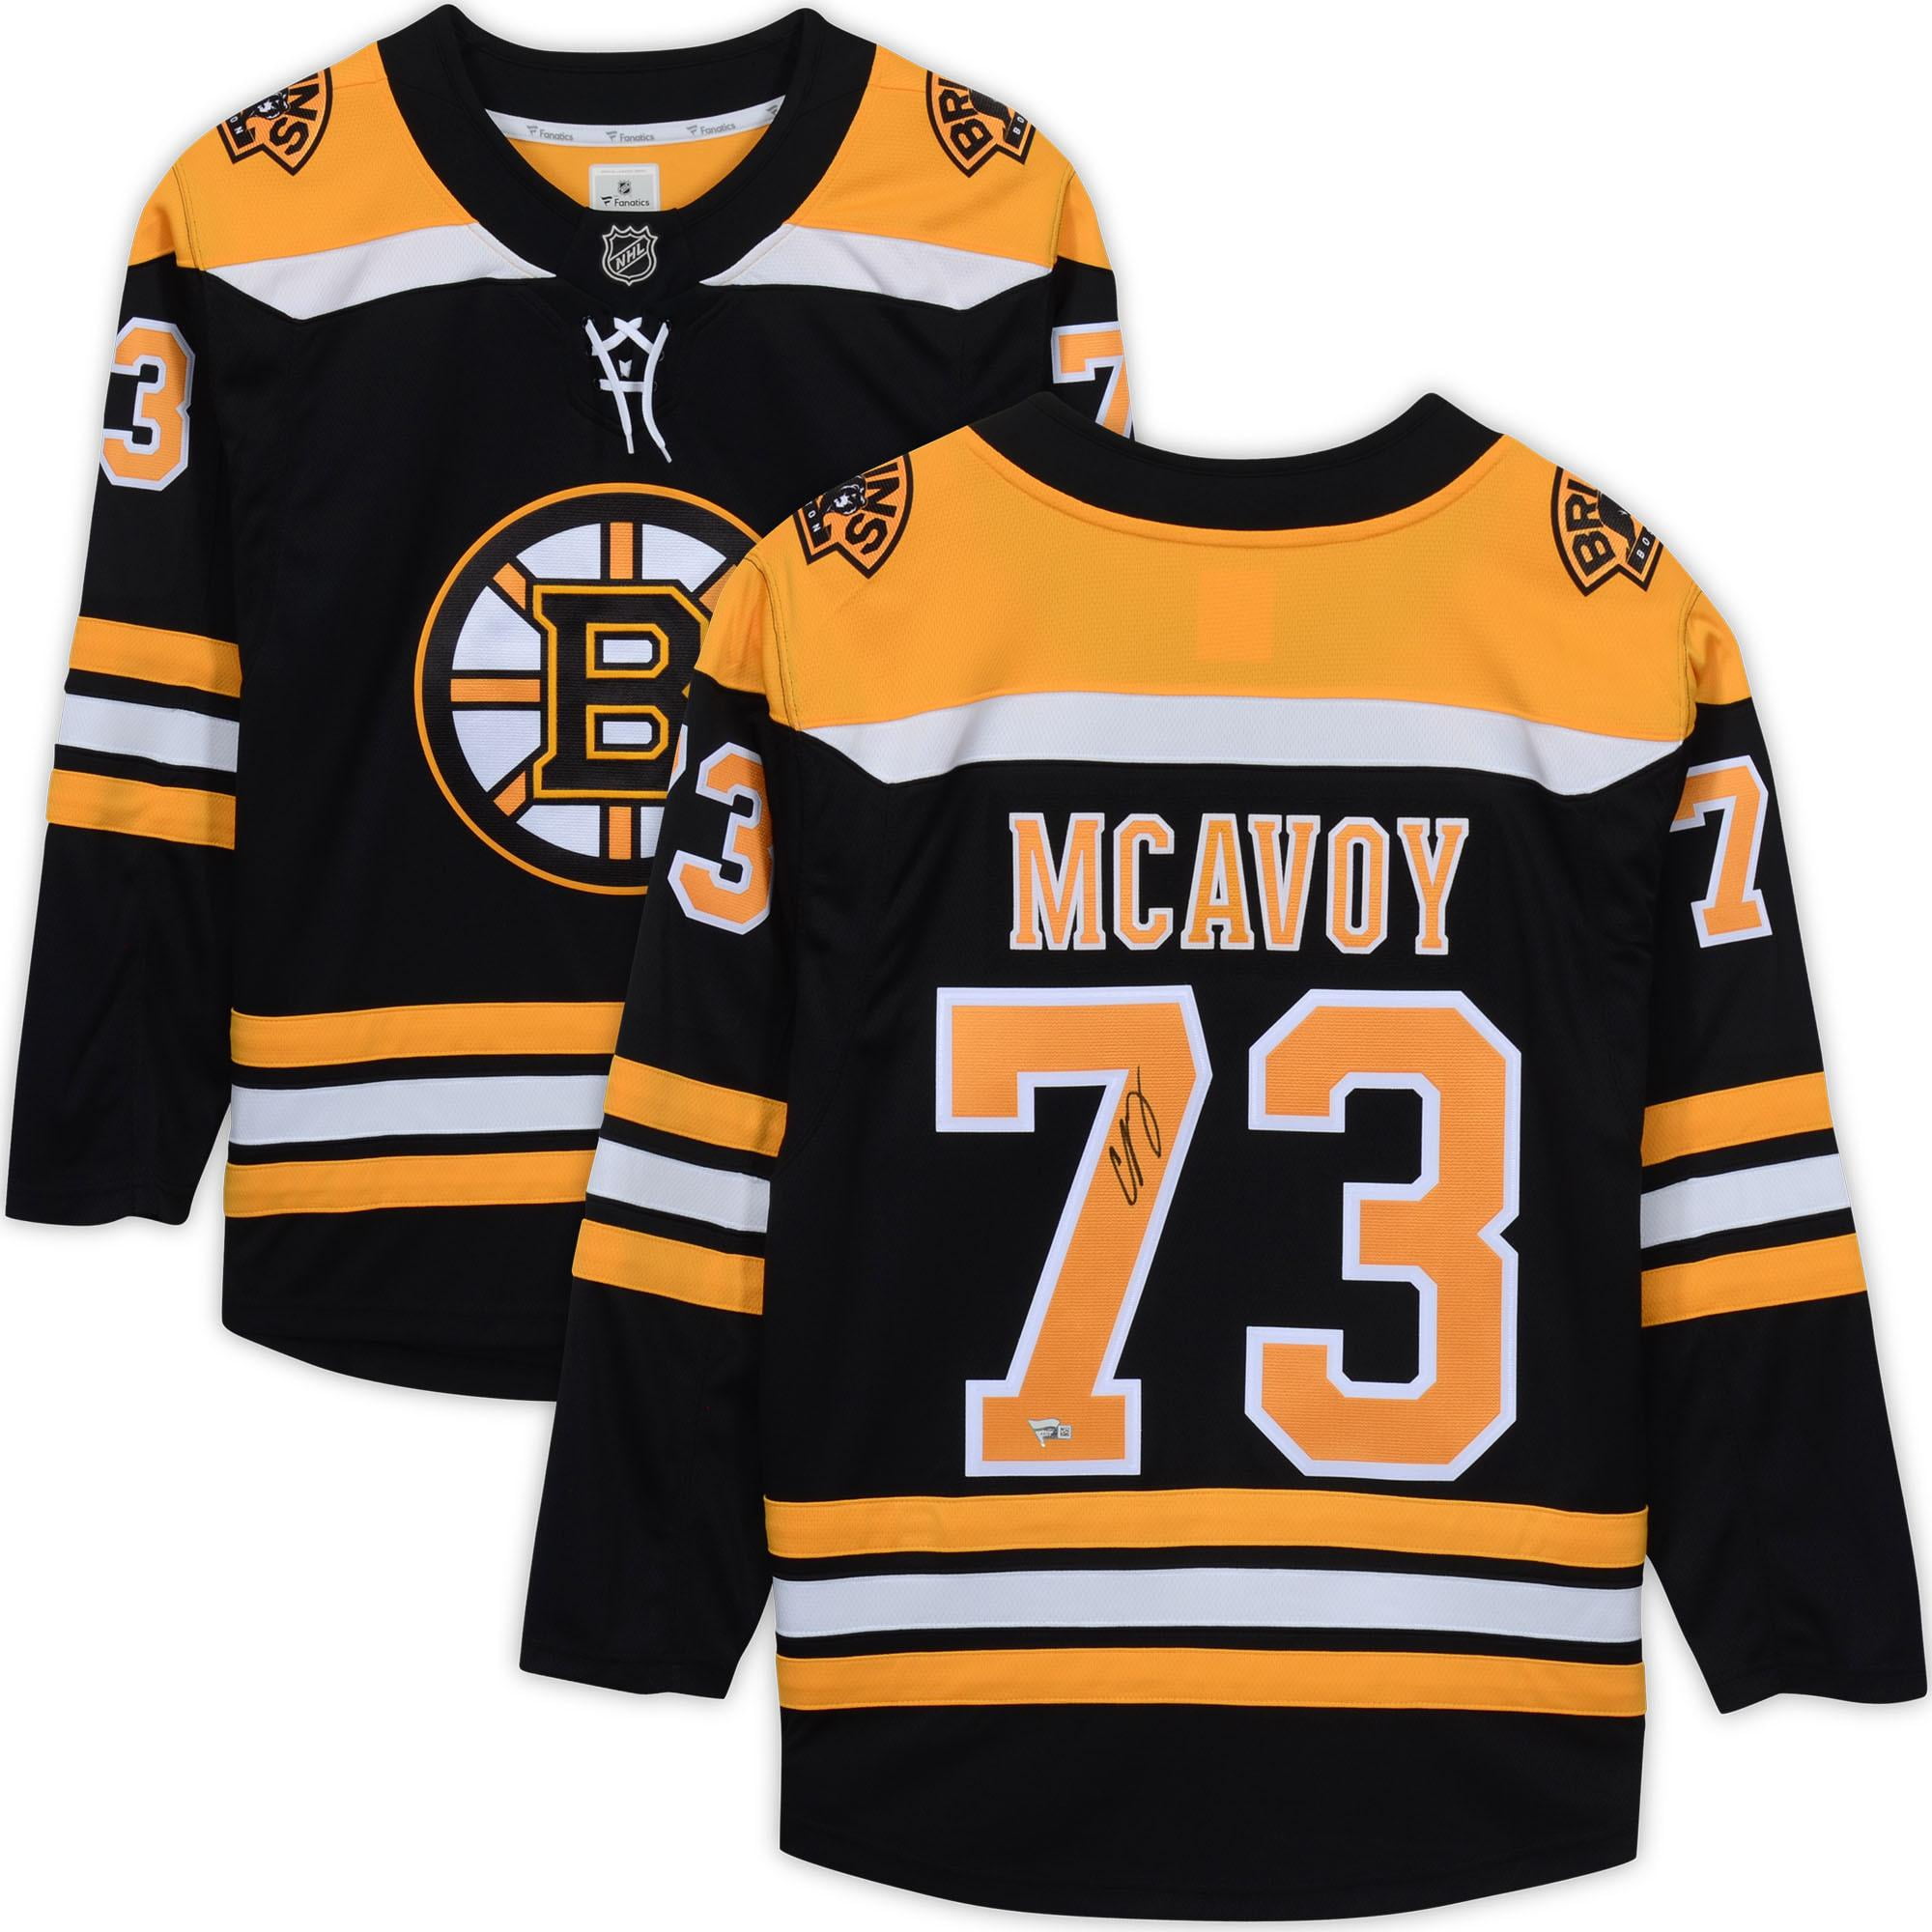 charlie mcavoy jersey number